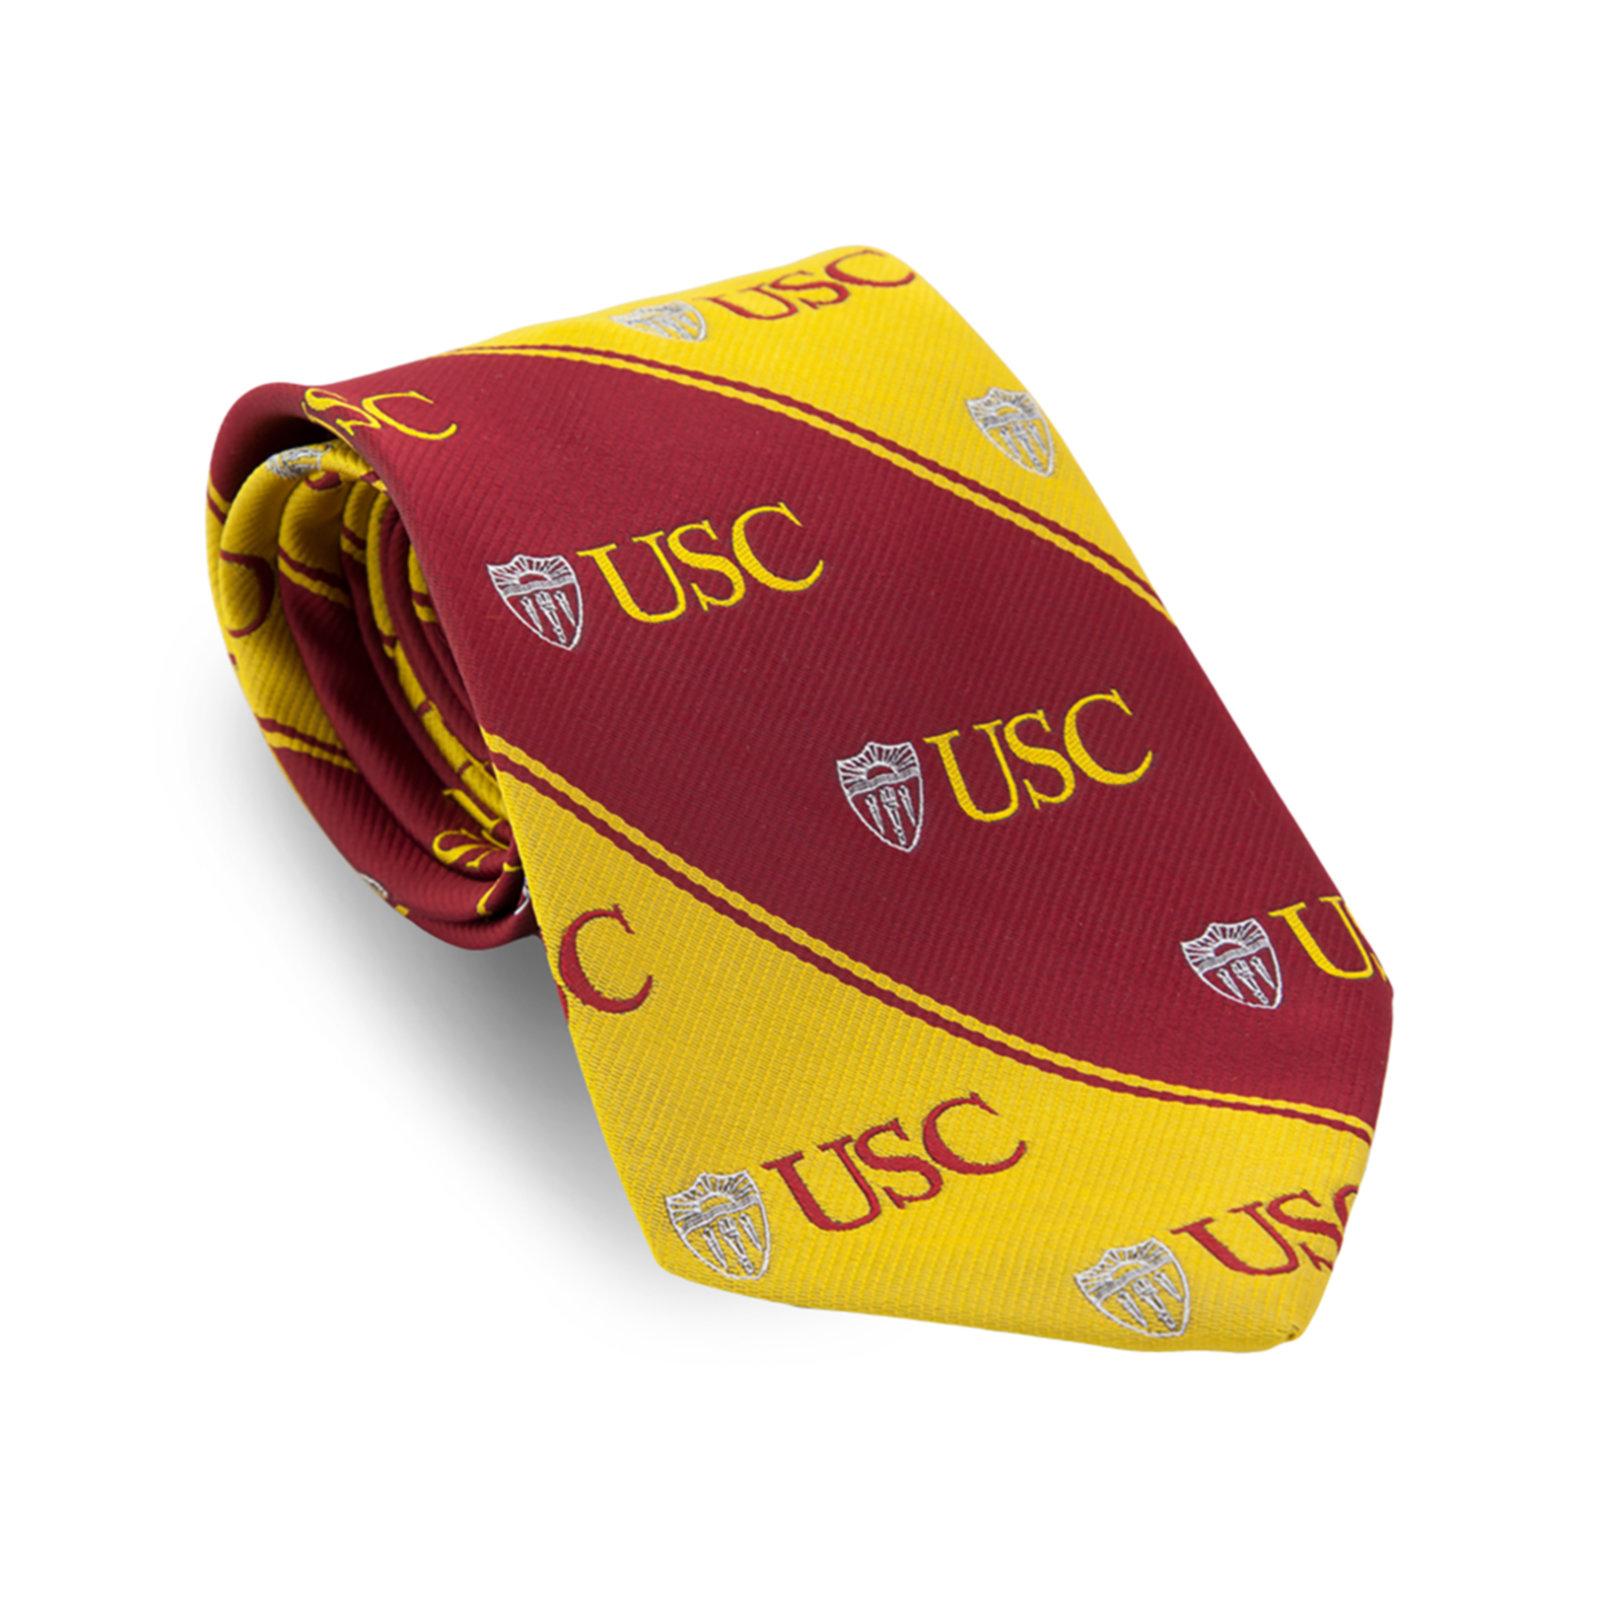 USC Shield Mens Cambridge Stripes Tie Cardinal/Gold Fits All image01